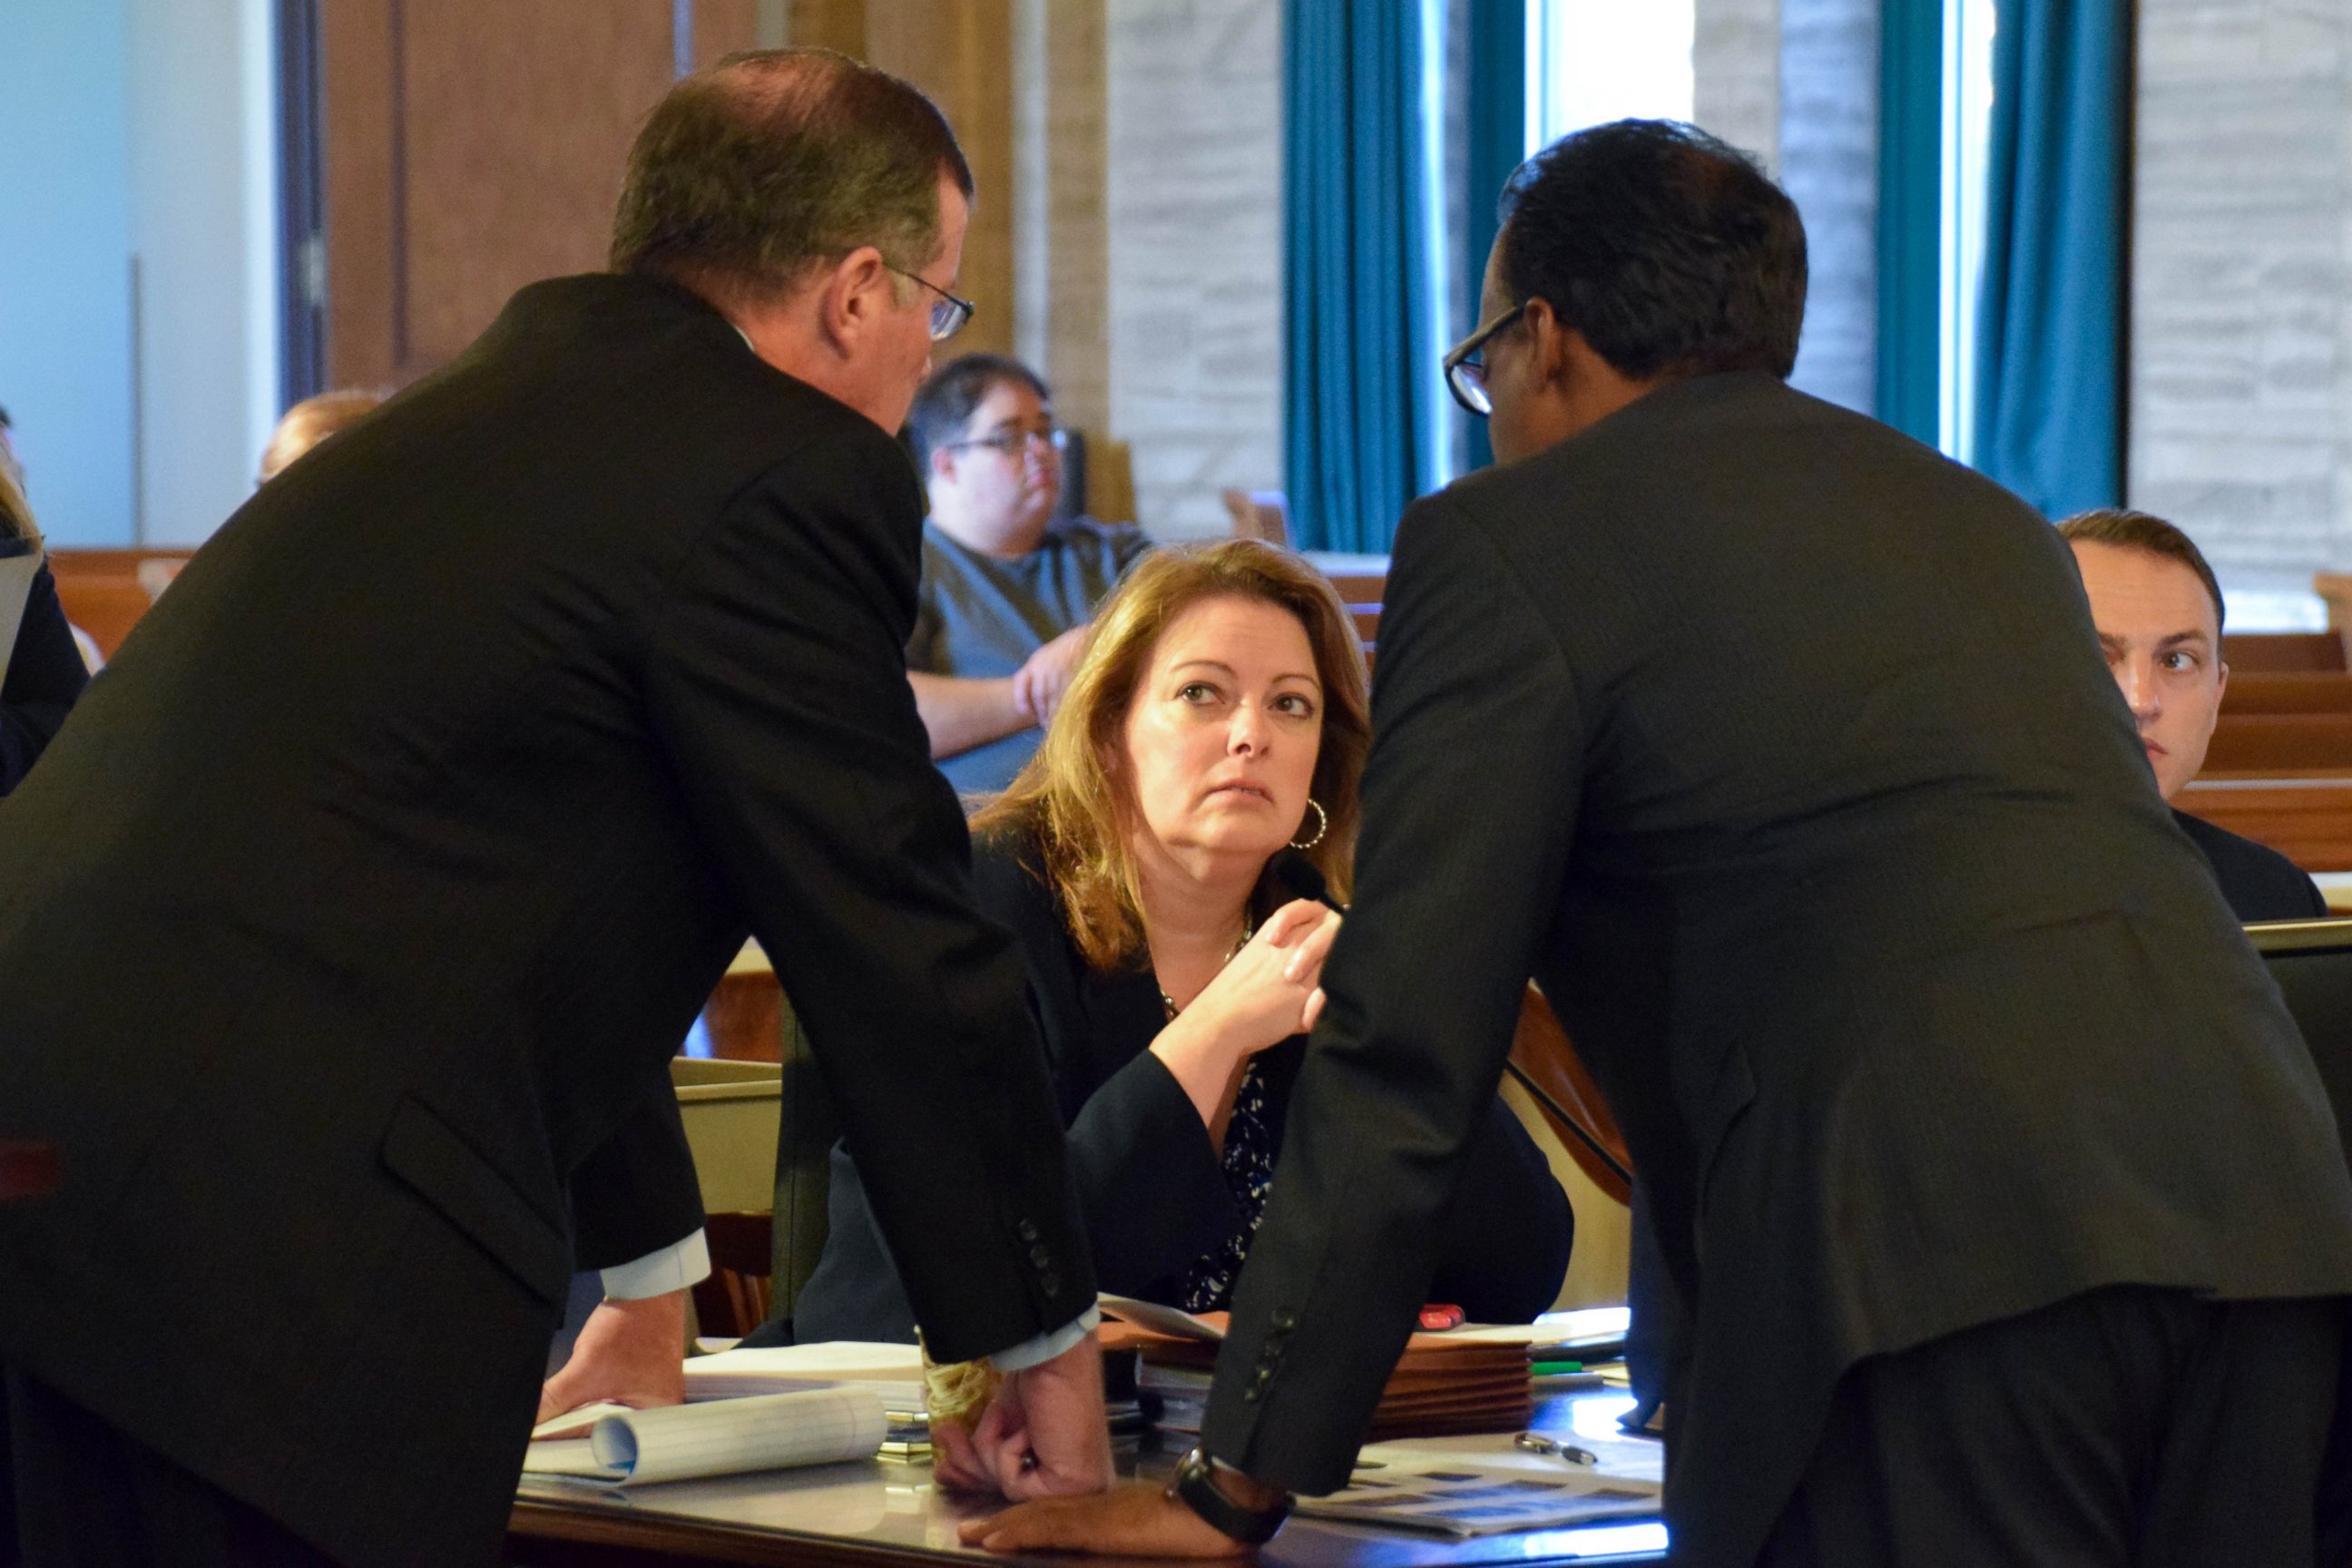 PHOTO: Prosecutors Mary Rain, center, and William Fitzpatrick, left, conference with defense attorney Earl Ward, right, on Sept. 20, 2016 in Canton, New York.